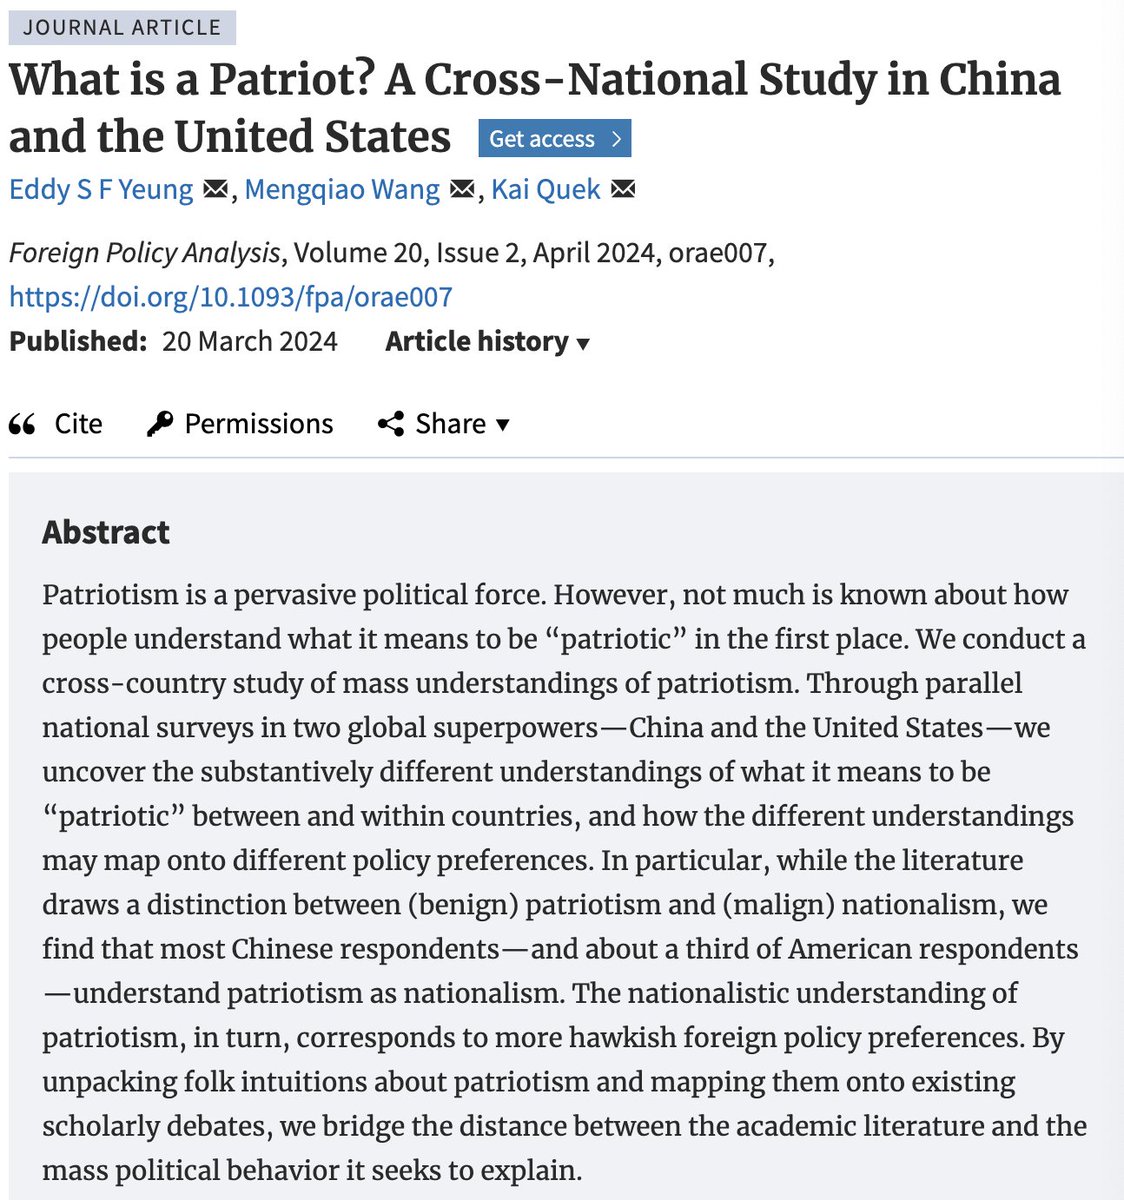 In their new 2024 research note 'What is a Patriot', Eddy S F Young, Mengqiao Wang, and Kai Queck conduct parallel national surveys of mass understanding of patriotism in two global superpowers China 🇨🇳and the United States 🇺🇸 academic.oup.com/fpa/article-ab…